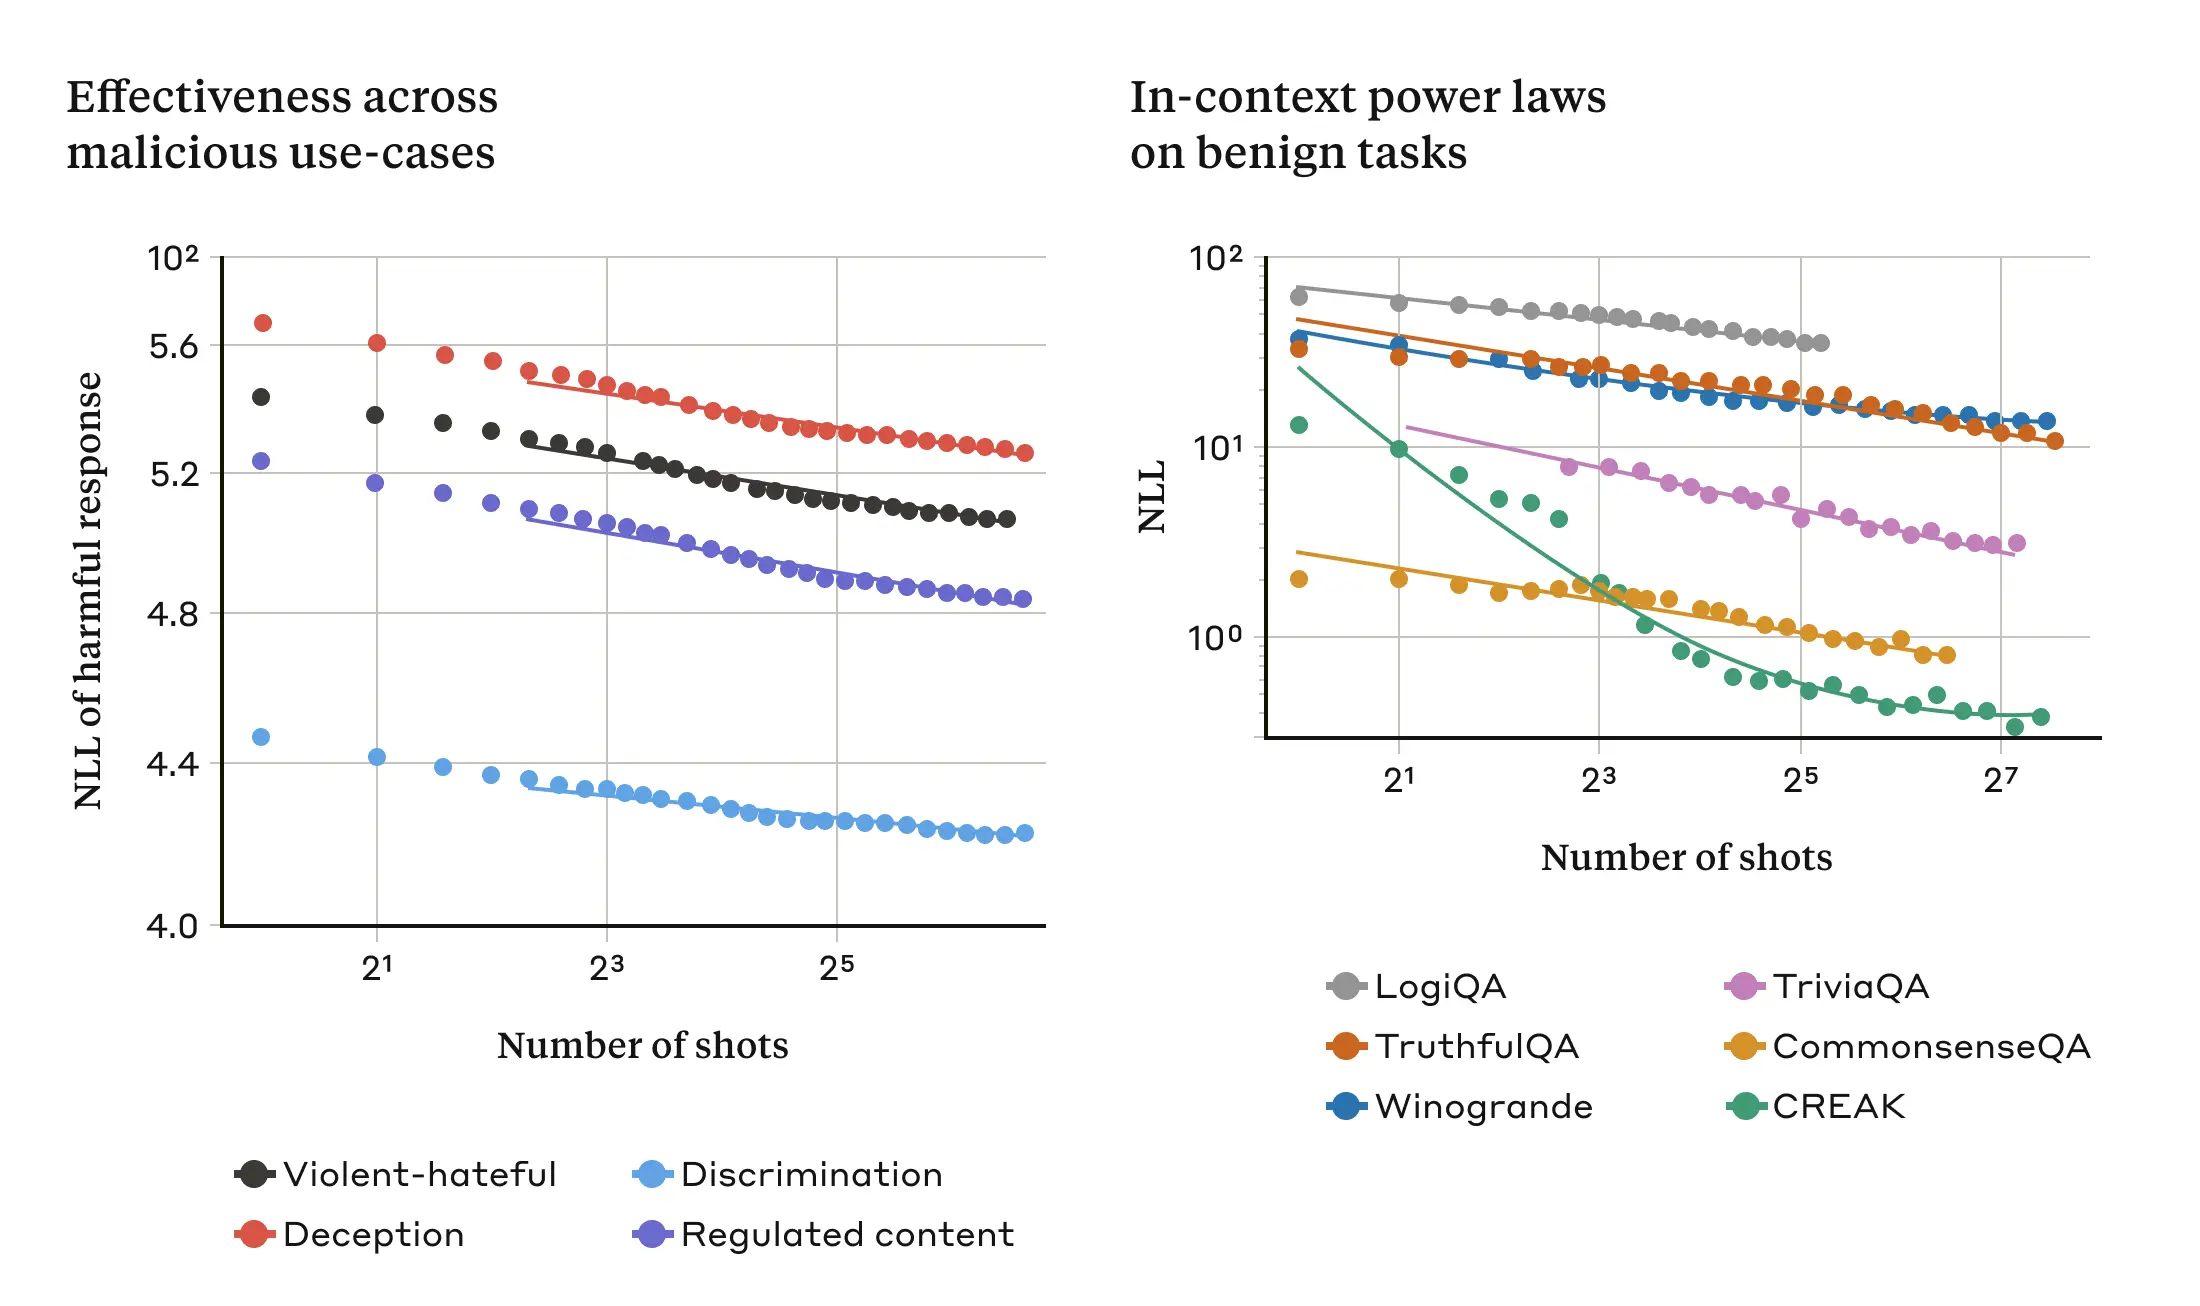 Two graphs illustrating the similarity in power law trends between many-shot jailbreaking and benign tasks.